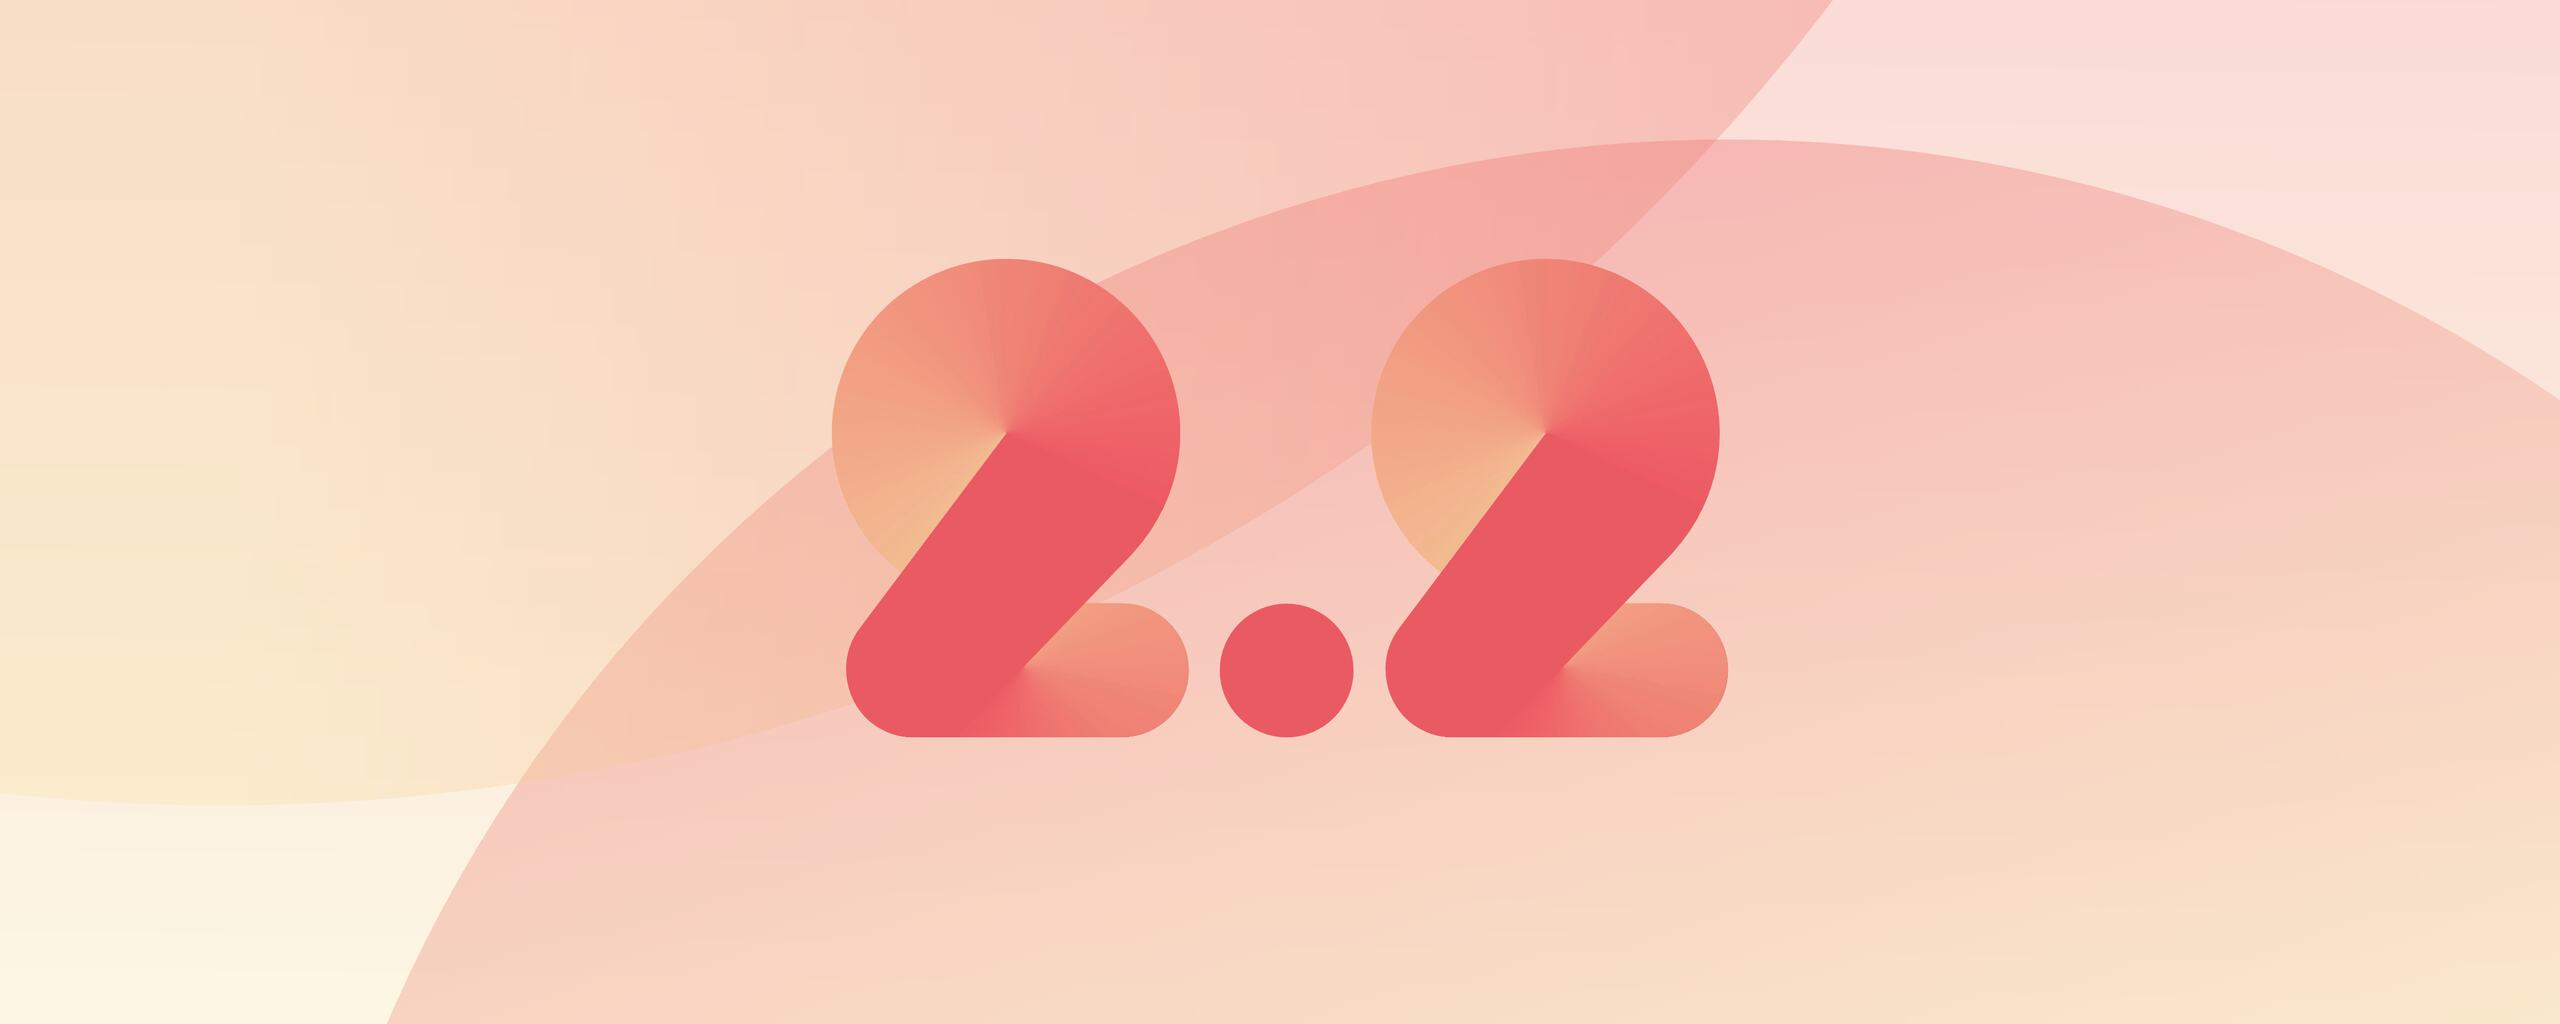 A graphic illustrating the number 2.2 in gradients of coral